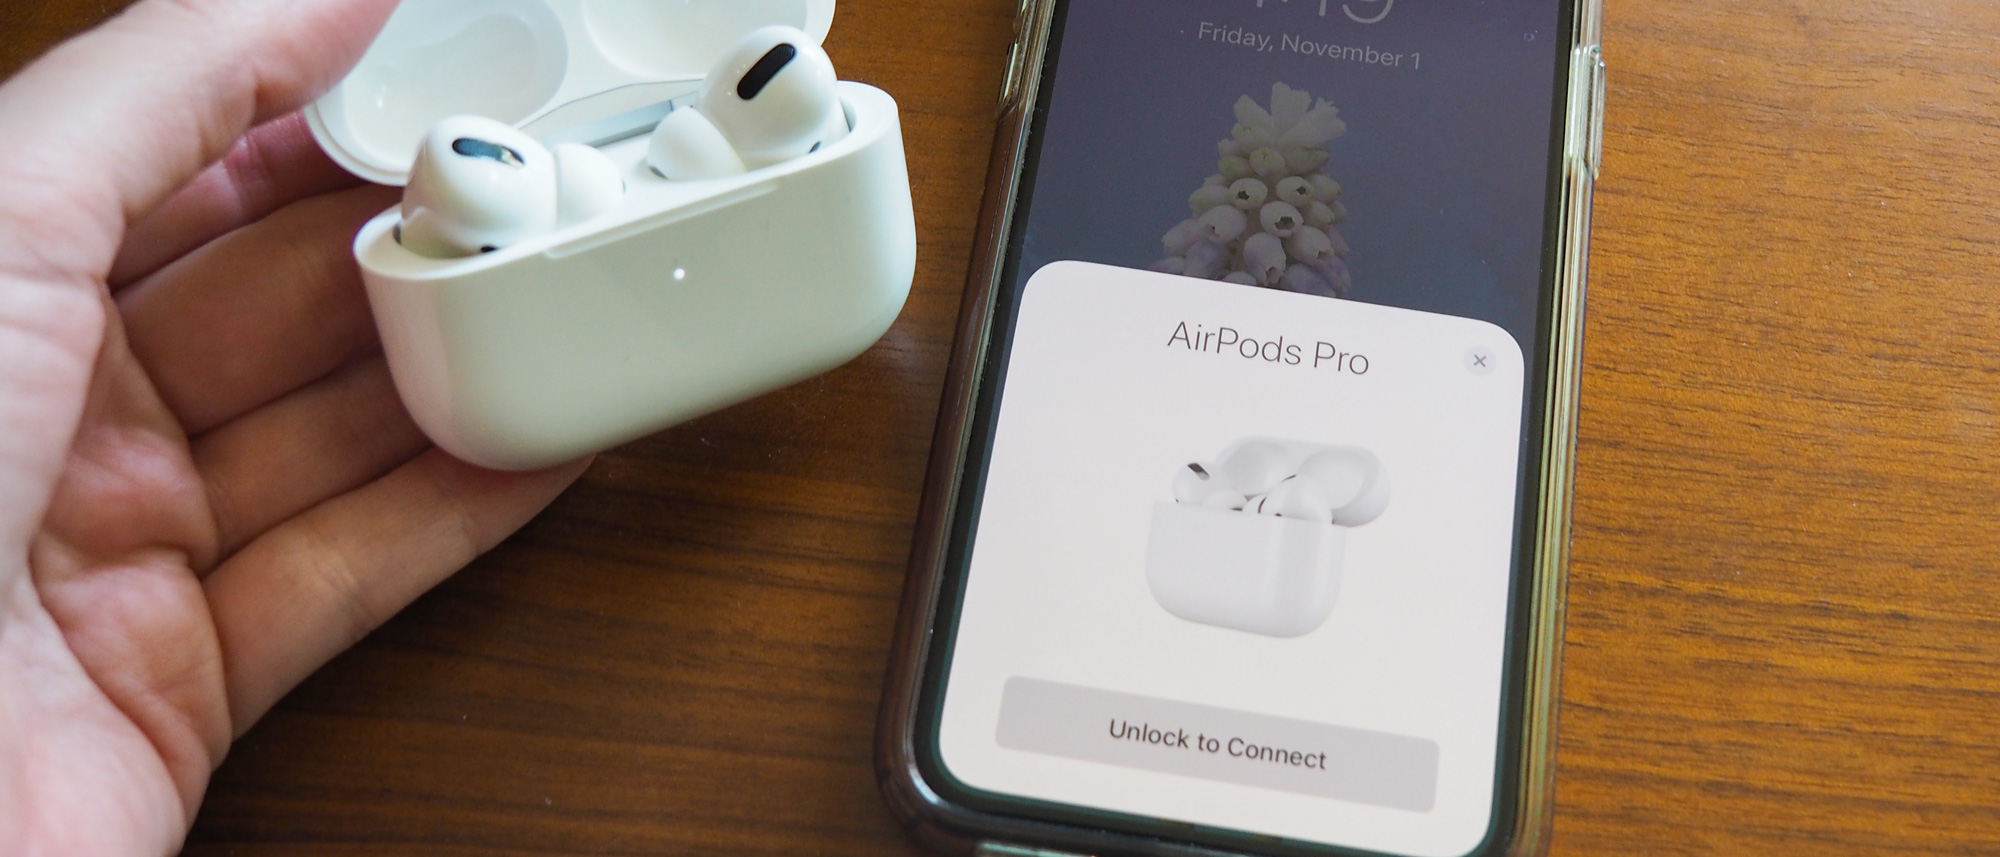 How To Fix AirPods That Won’t Connect